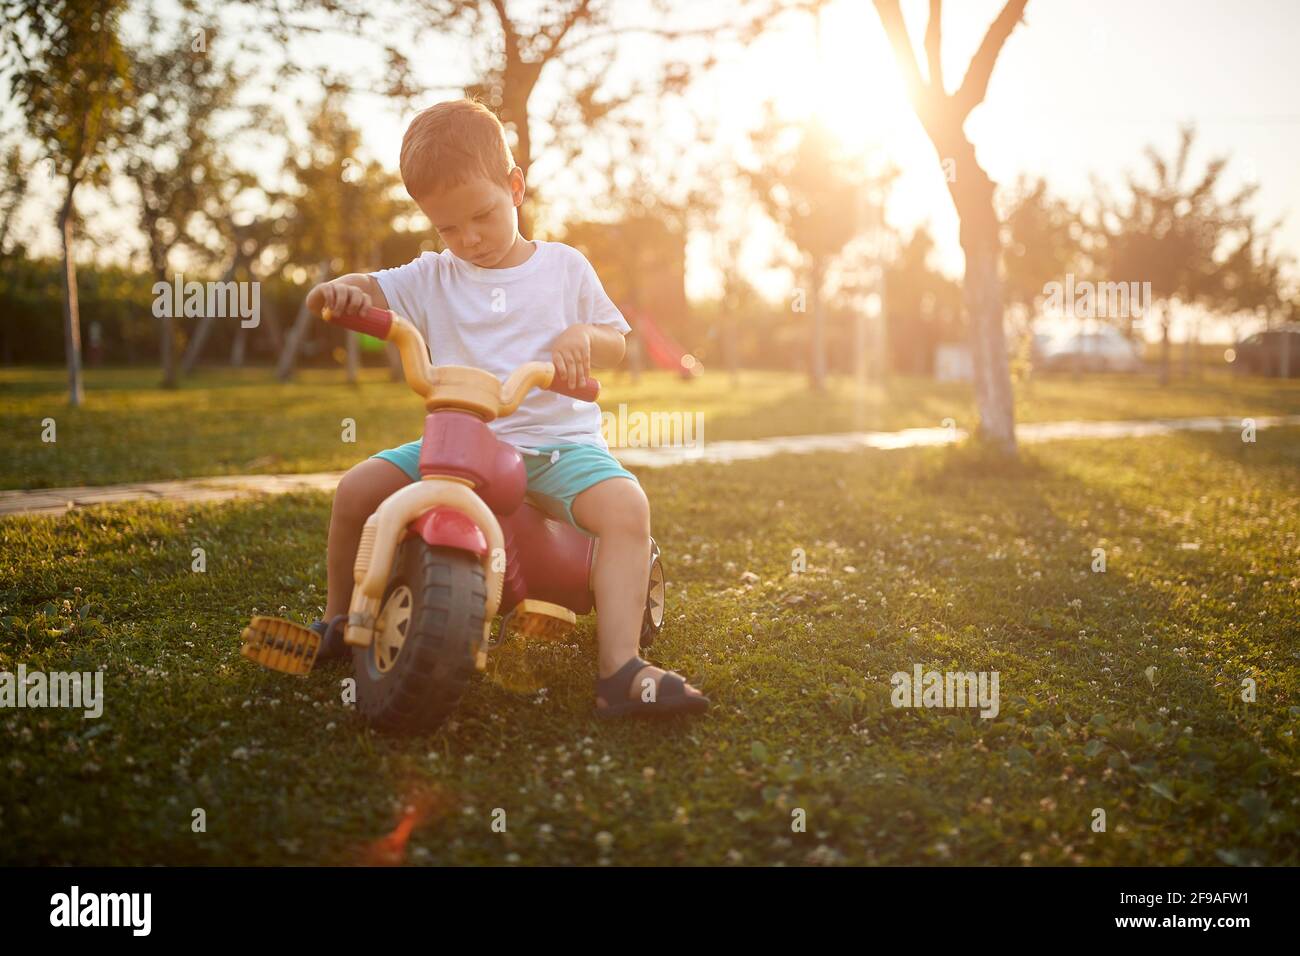 A little boy riding a bike in the yard in the farm on a beautiful sunny day. Farm, countryside, summer Stock Photo